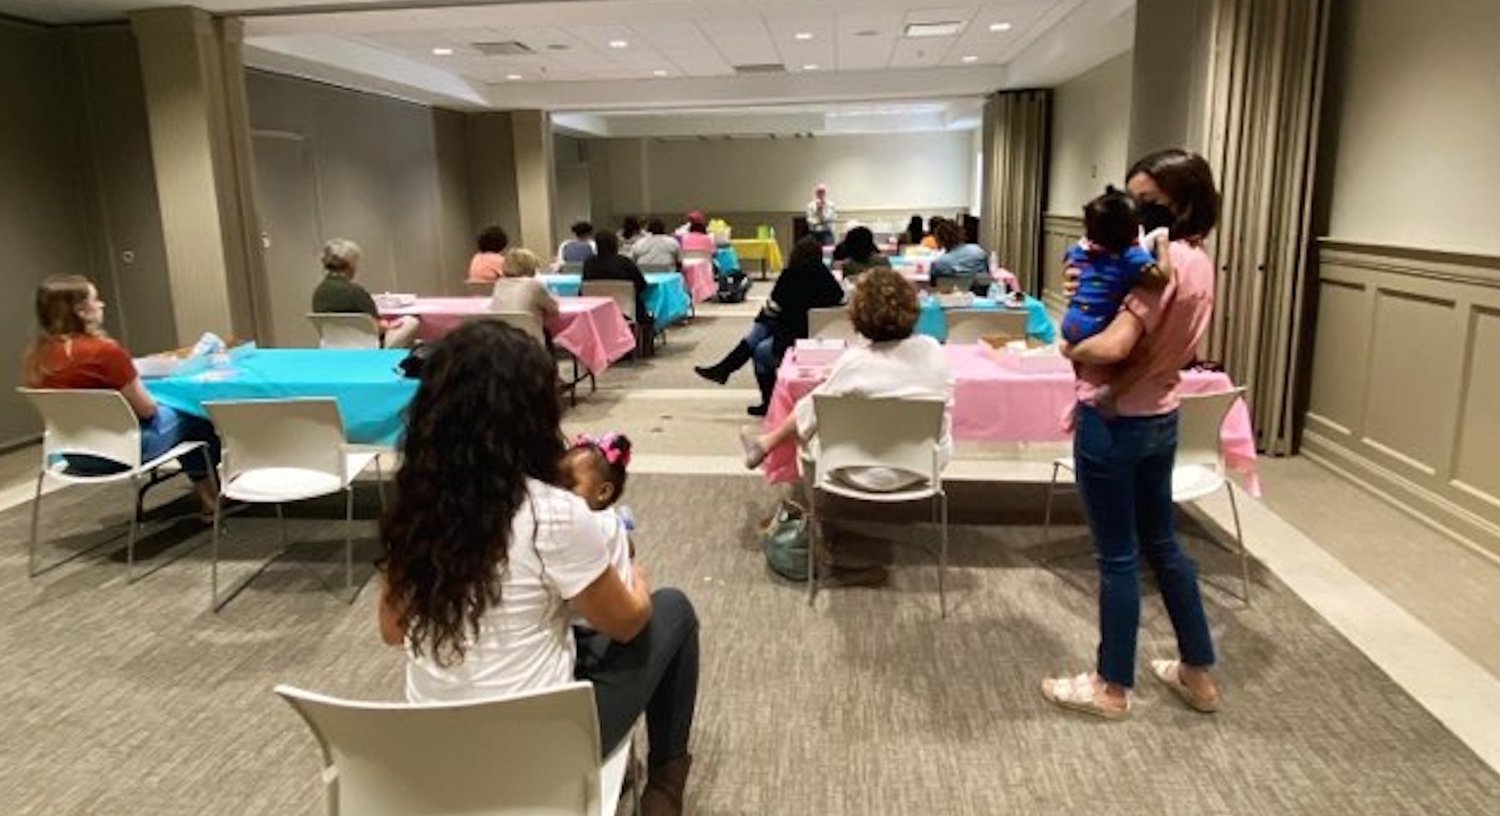 Holistic help and hope for women who chose life and need a little help. Maternal needs and child health outcomes are addressed through Equipped Mom seminars like this one at Jackson's First Presbyterian Church.